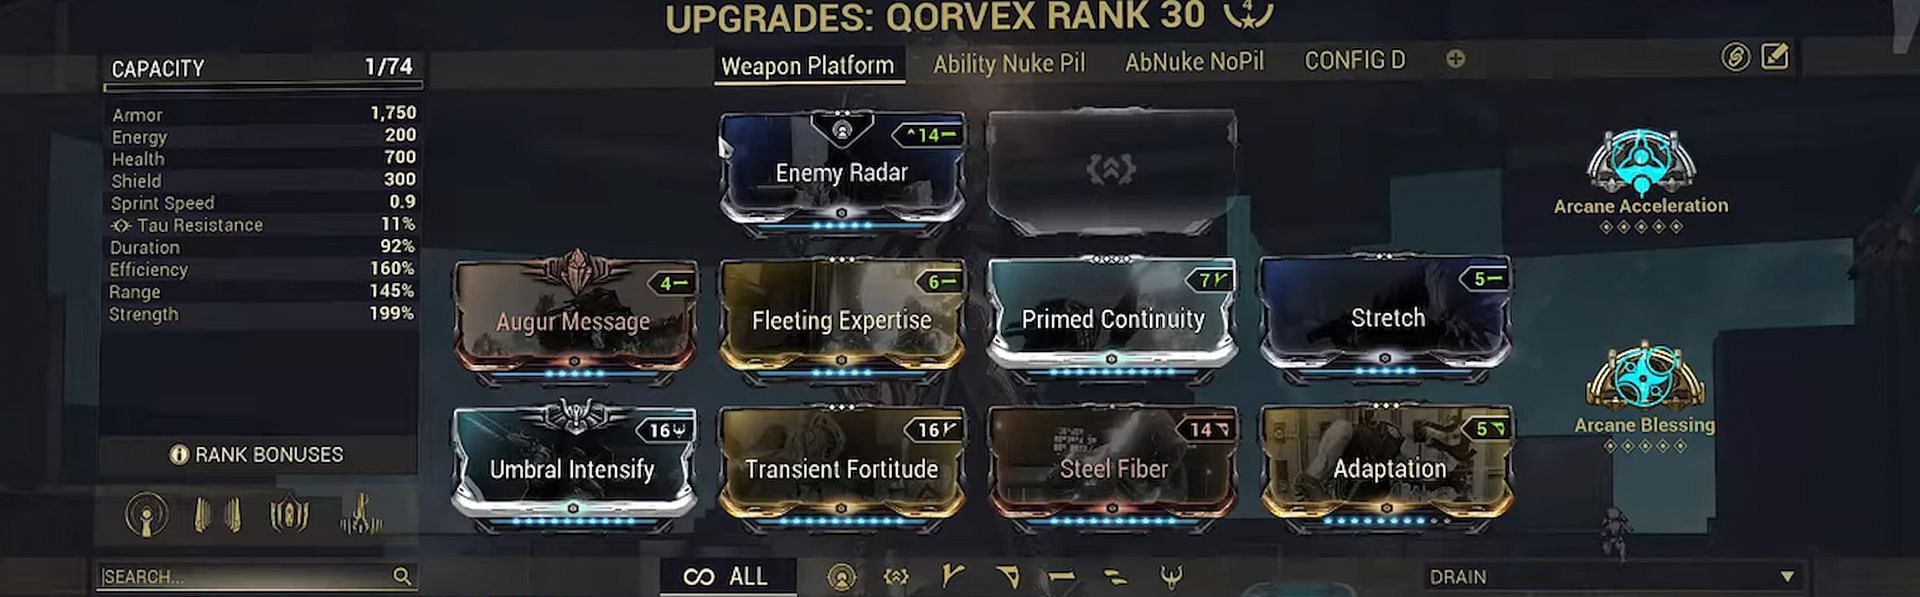 General-purpose Warframe Qorvex build to get the best out of all four abilities (Image via Digital Extremes)